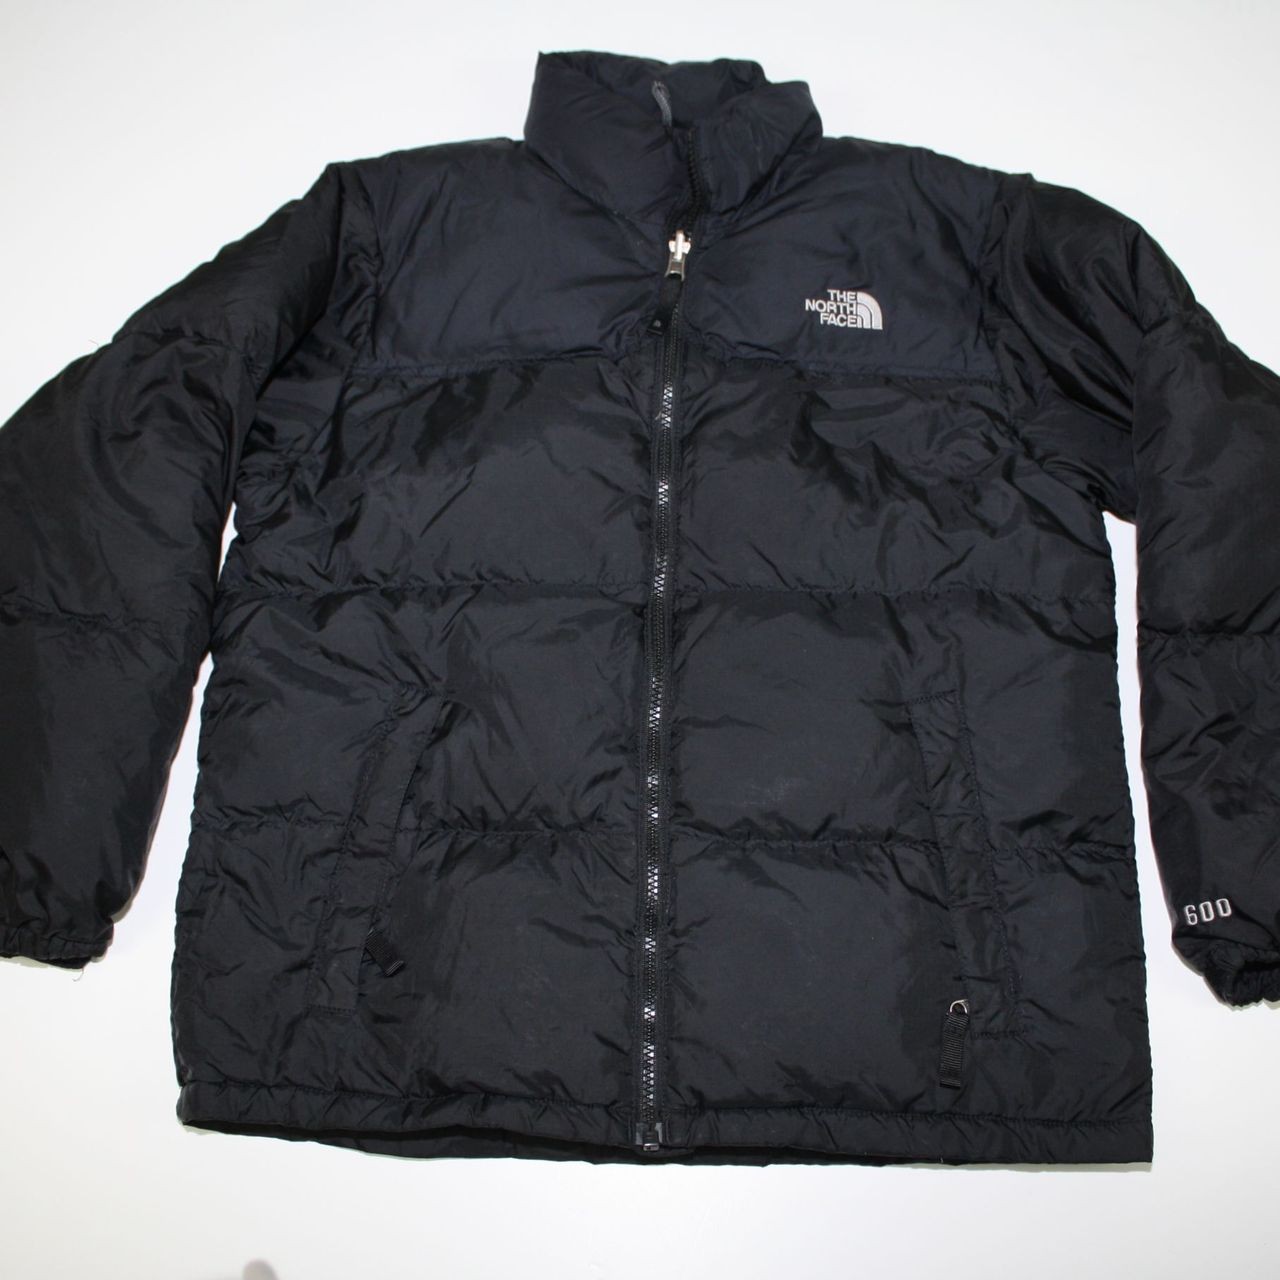 the north face jacket 600